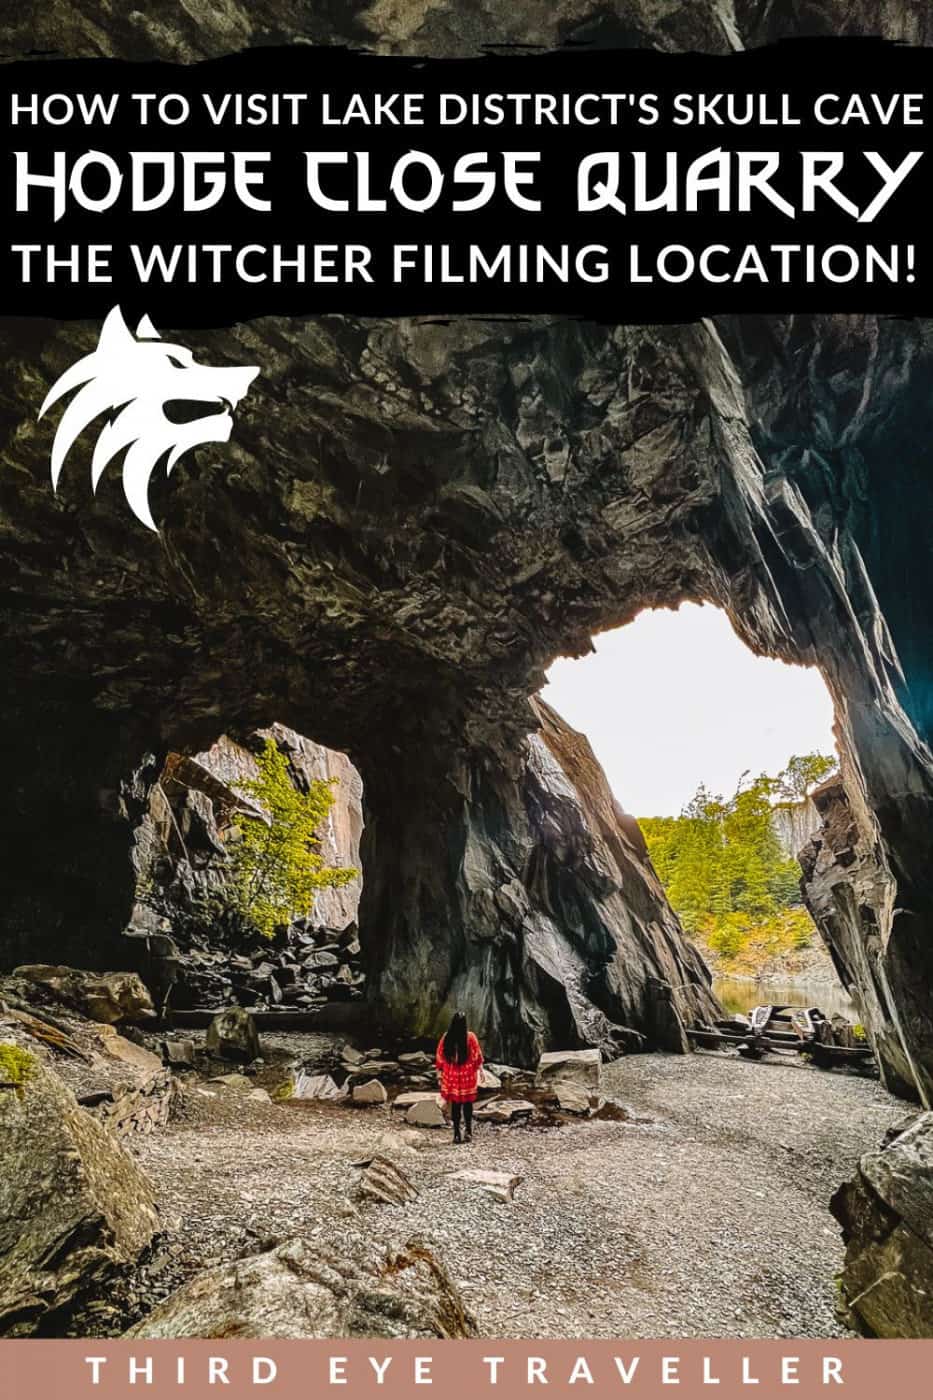 Hodge CLose Quarry Witcher Filming Location